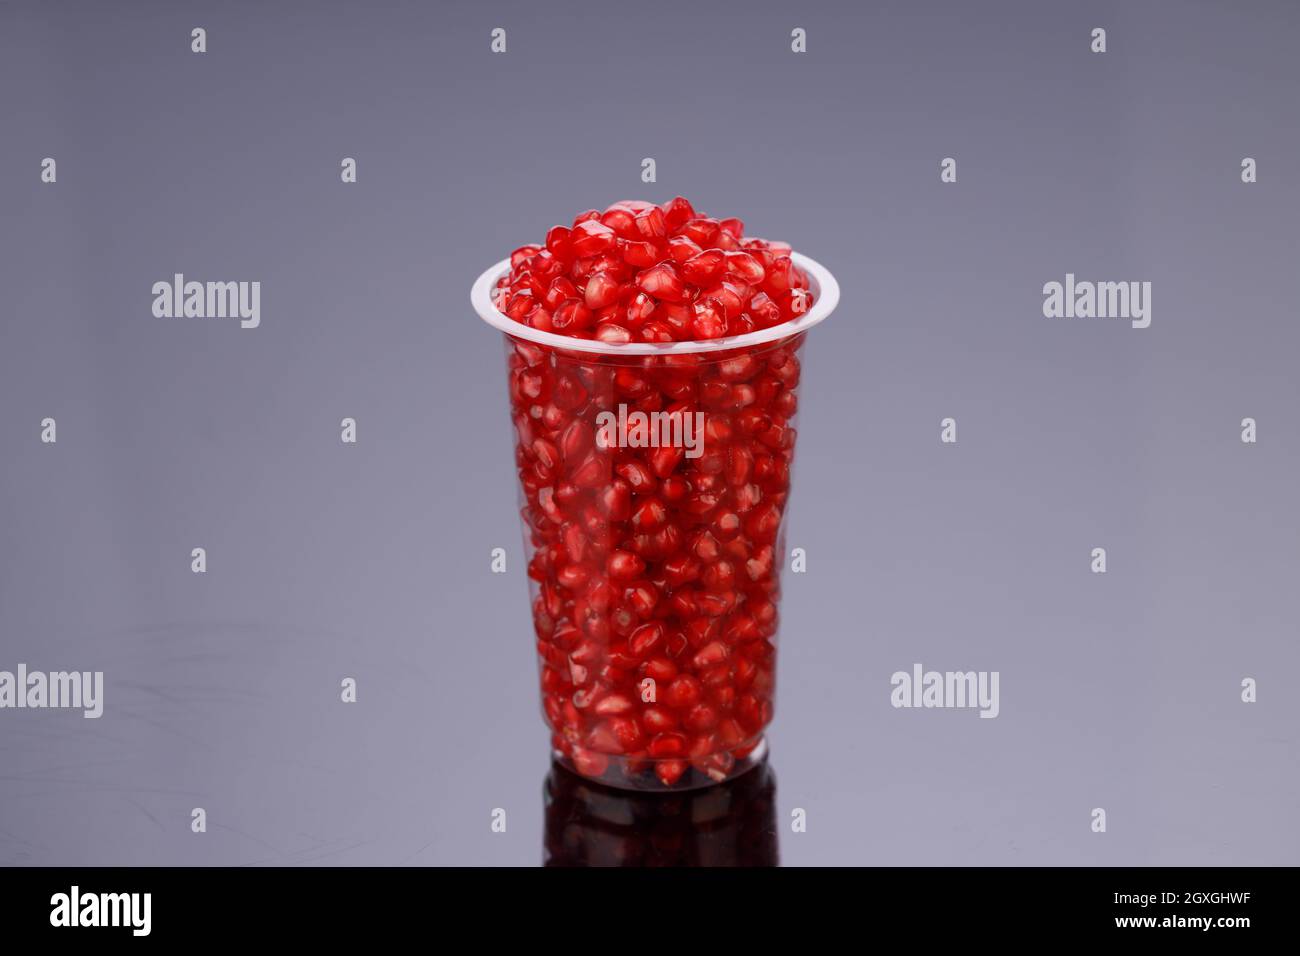 Fresh Pomegranate seed arranged in a  glass container with  black background, isolated. Stock Photo